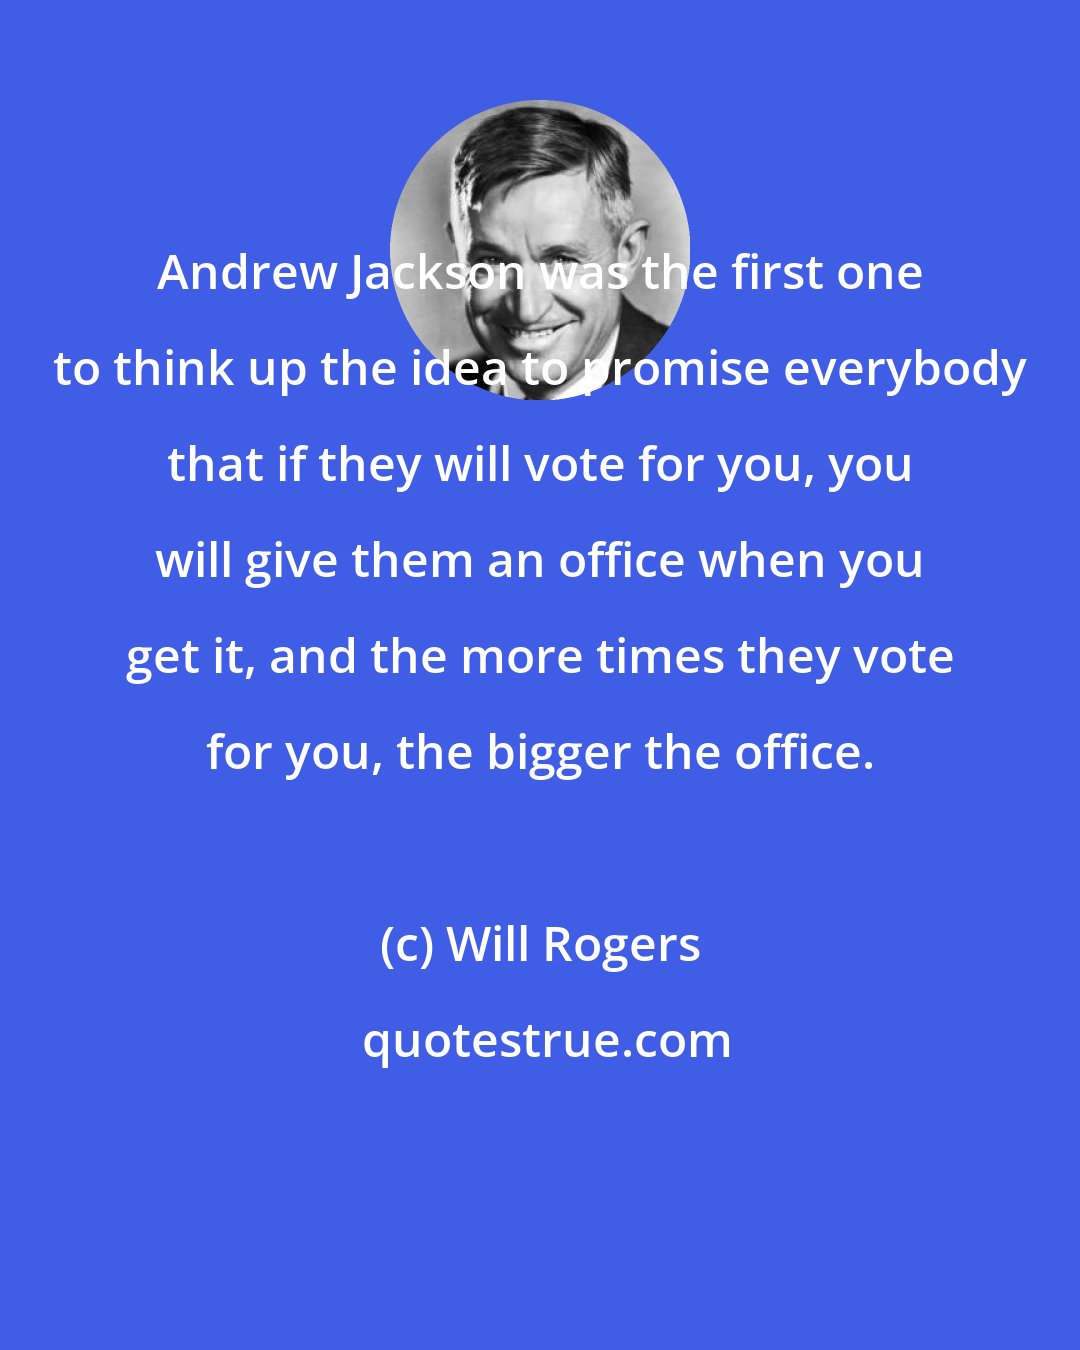 Will Rogers: Andrew Jackson was the first one to think up the idea to promise everybody that if they will vote for you, you will give them an office when you get it, and the more times they vote for you, the bigger the office.